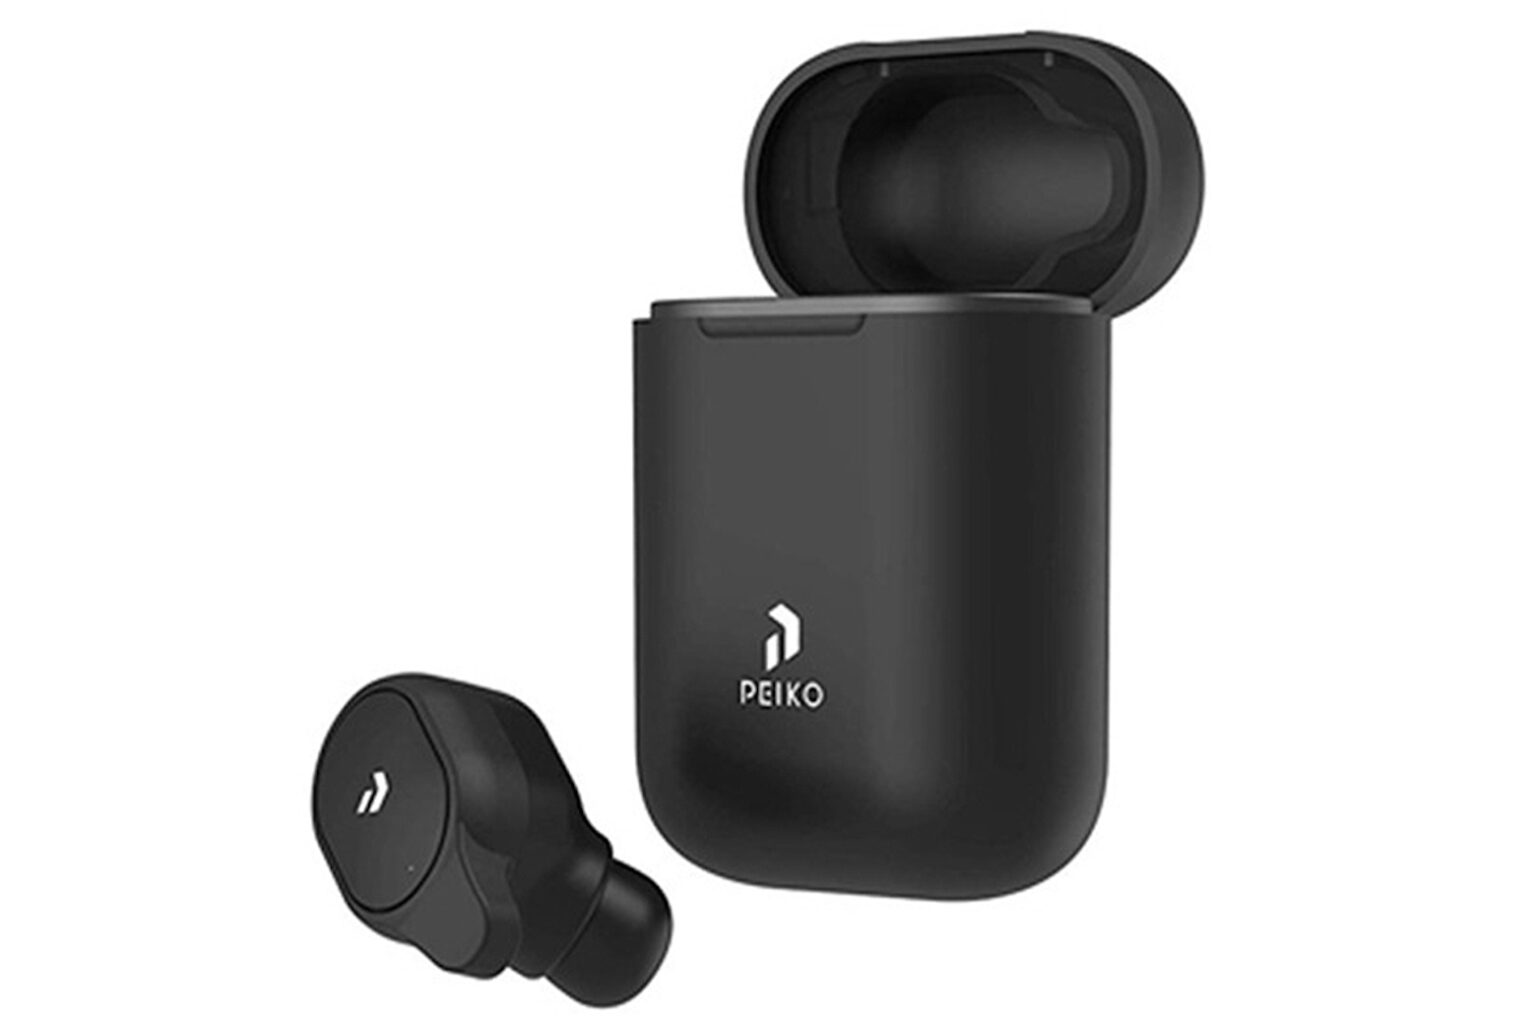 Use these $89.99 earbuds to understand up to 50 languages.